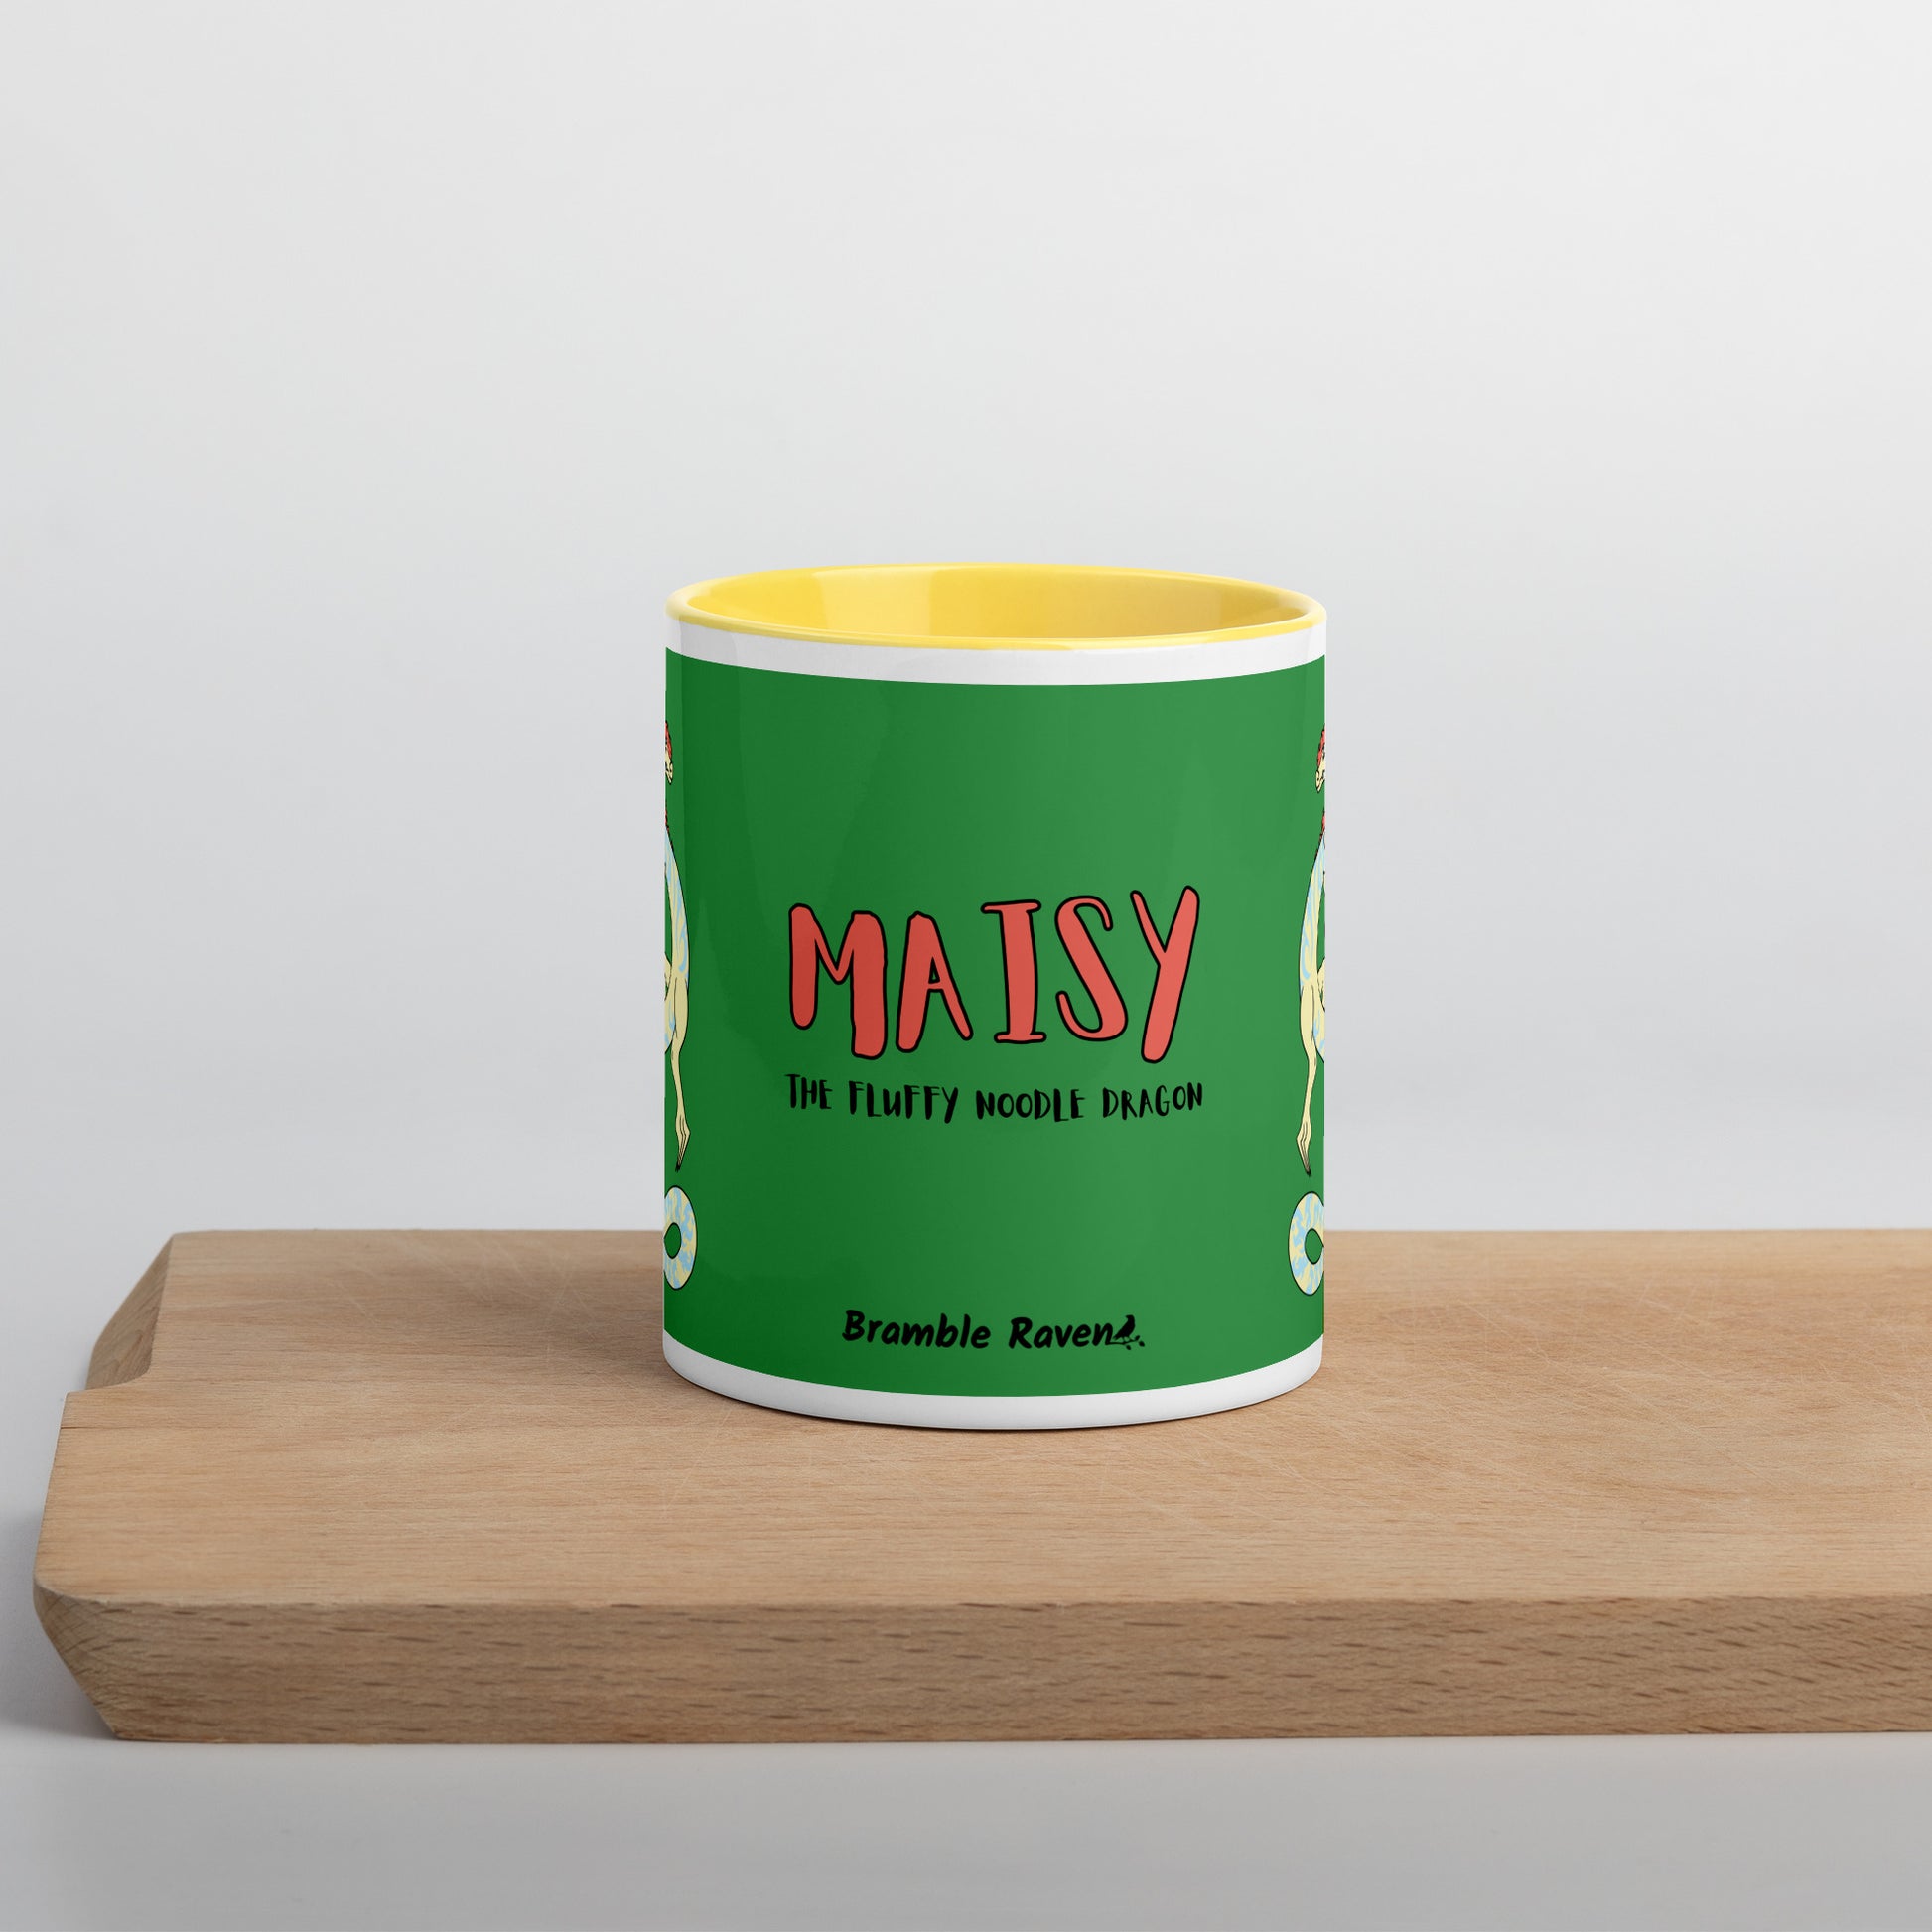 11 ounce white ceramic mug. Yellow inside and handle. Features double-sided image of Maisy the Fuzzy Noodle Dragon with a slice of pizza.  Front view shows Maisy the Fluffy Noodle Dragon text with Bramble Raven logo.